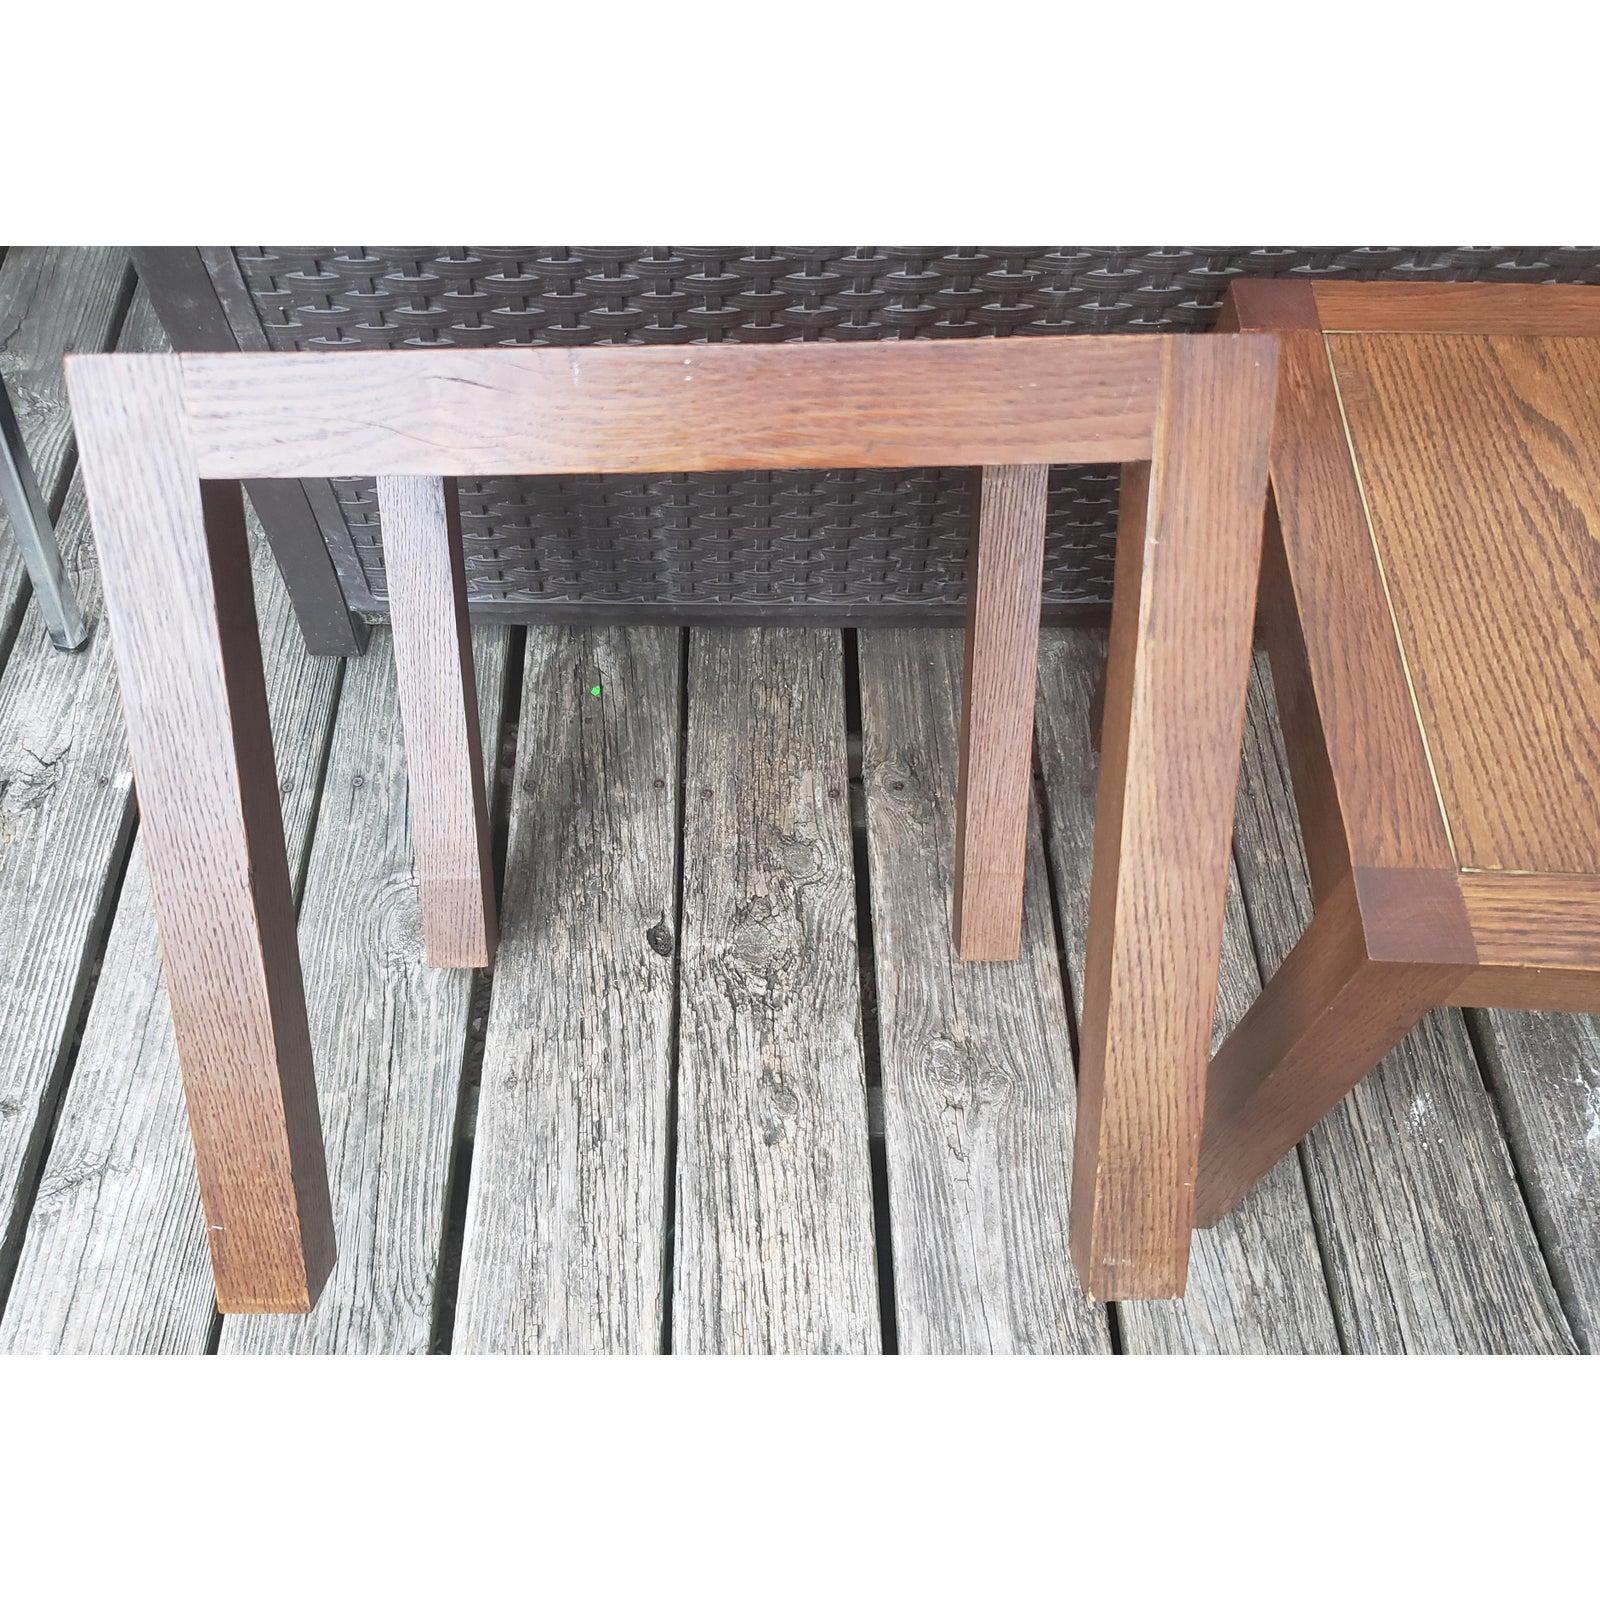 Authentic handmade solid oak side tables. The Parsons tables have the same thickness to both top and legs and is a classic design.

Offered in solid oak throughout with a square brass inset on top of the table.
Extremely solid construction with